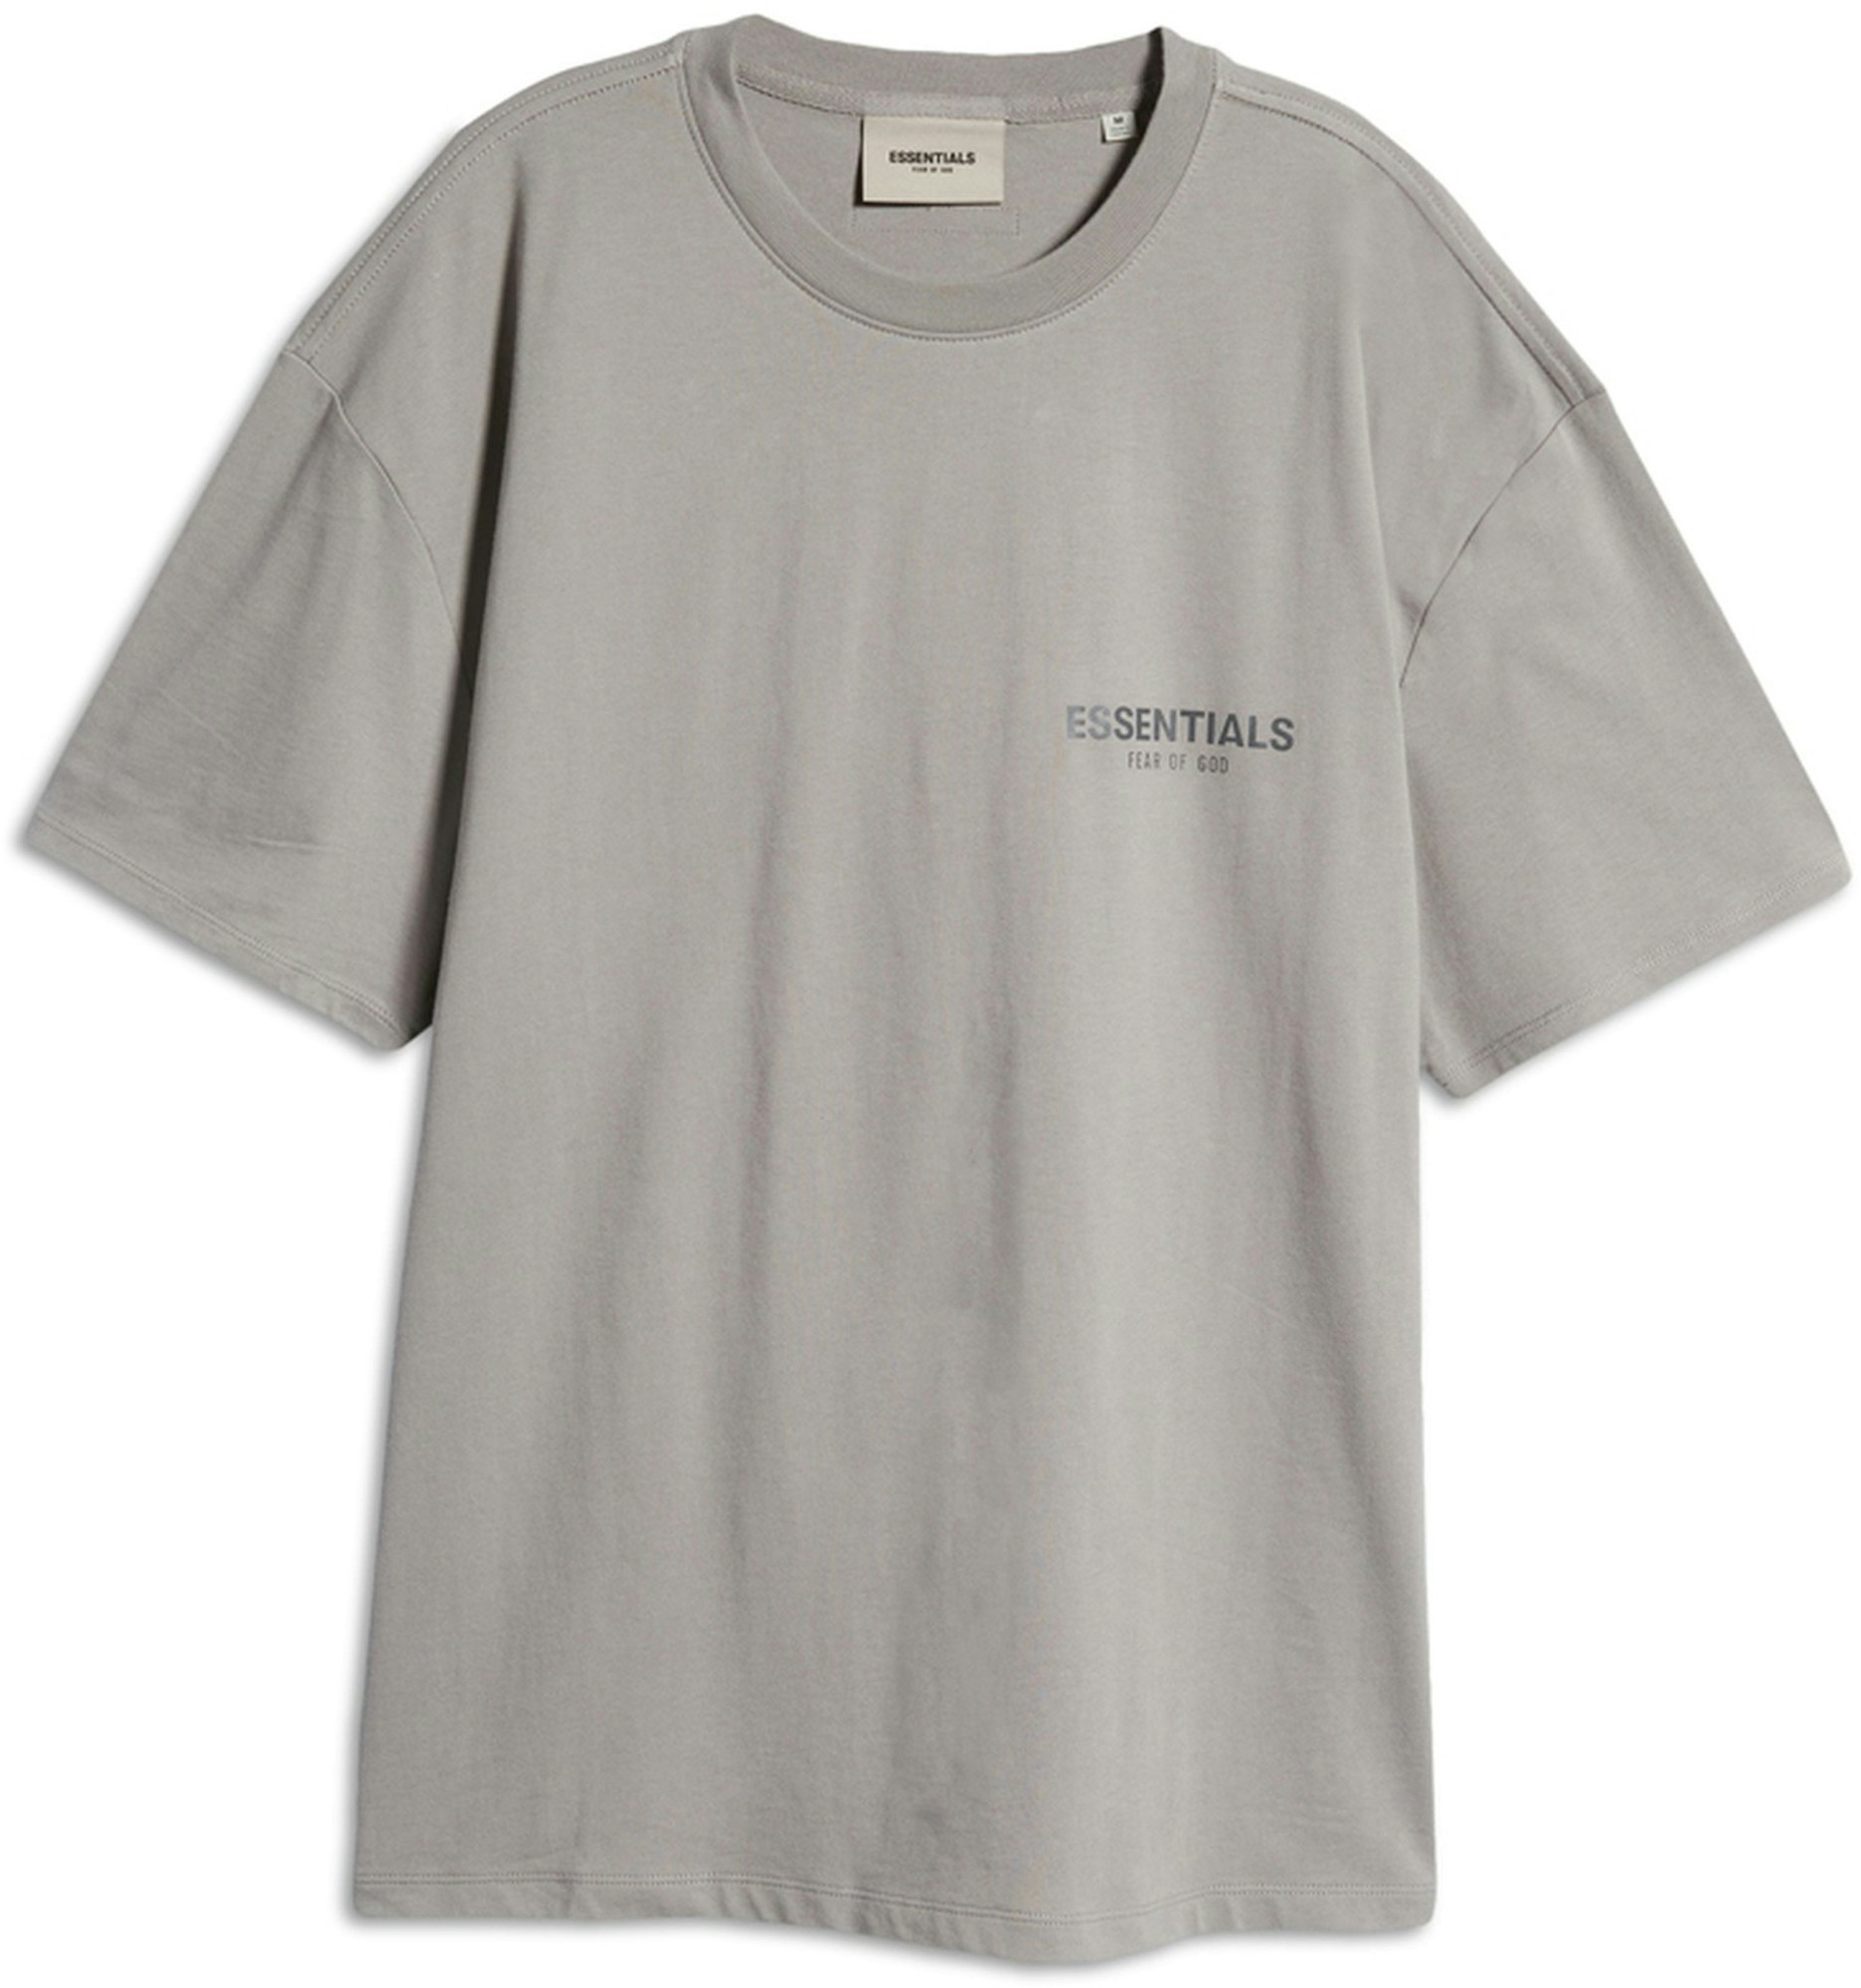 Fear of God Essentials T-shirt Cement/Pebble - SS21